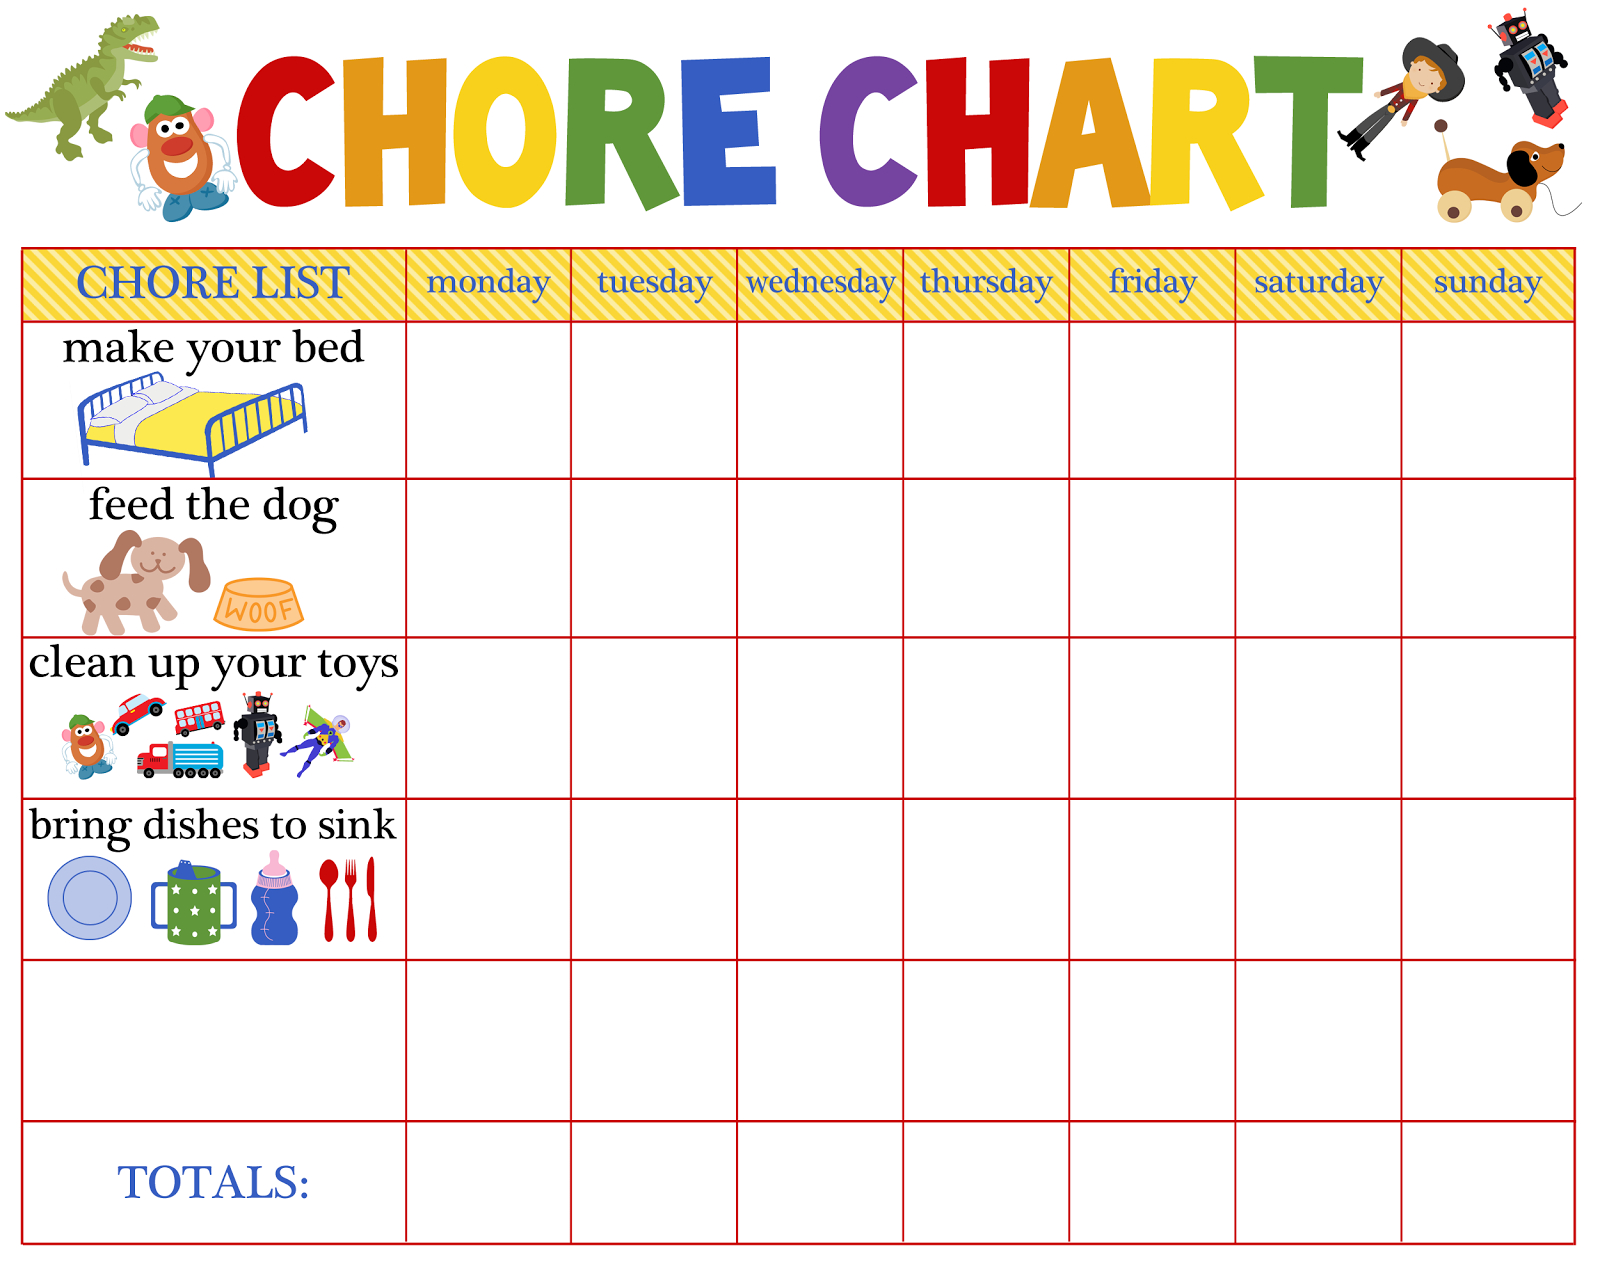 Live.life.lovely.: A Practical Solution To House Cleaning For Moms - Free Printable Toddler Chore Chart